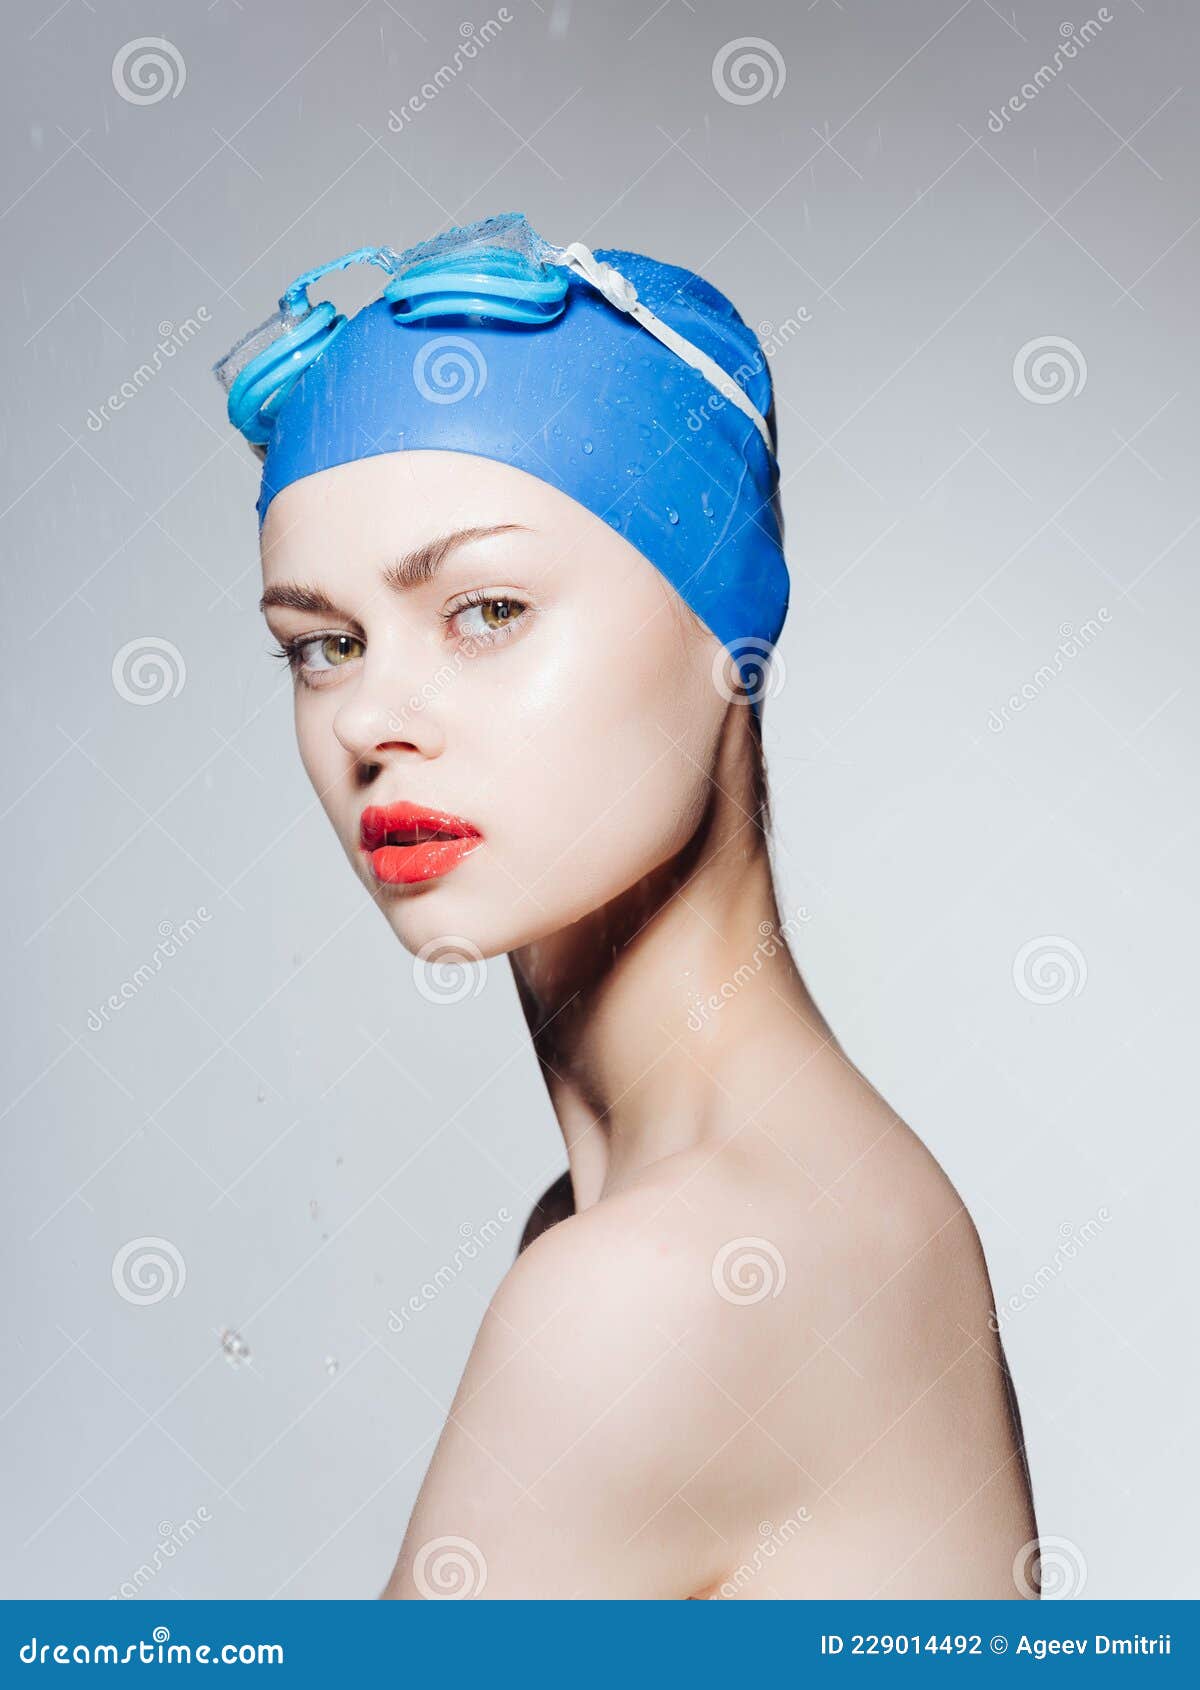 Woman With Bare Shoulders Swimming Cap Athlete Workout Sport Stock